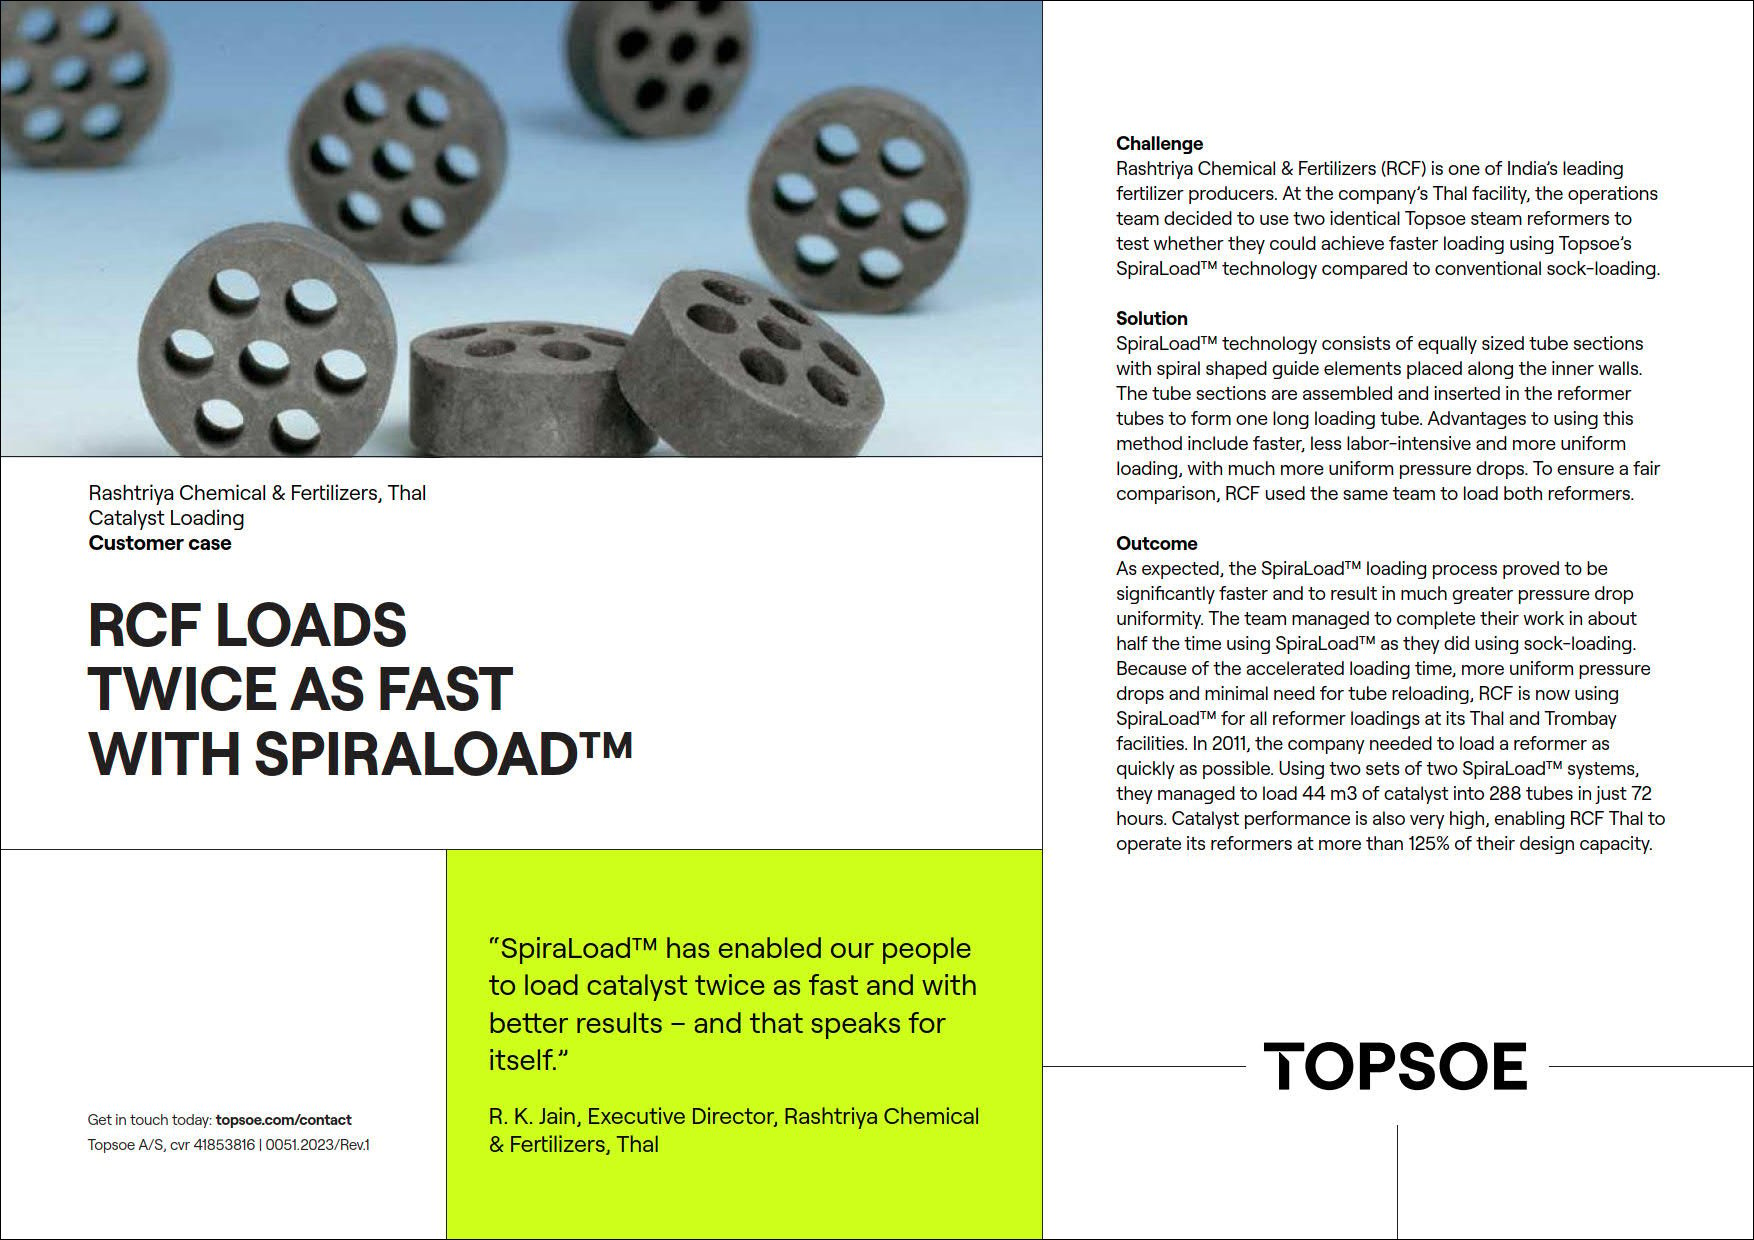 RCF loads twice as fast with spiraload™